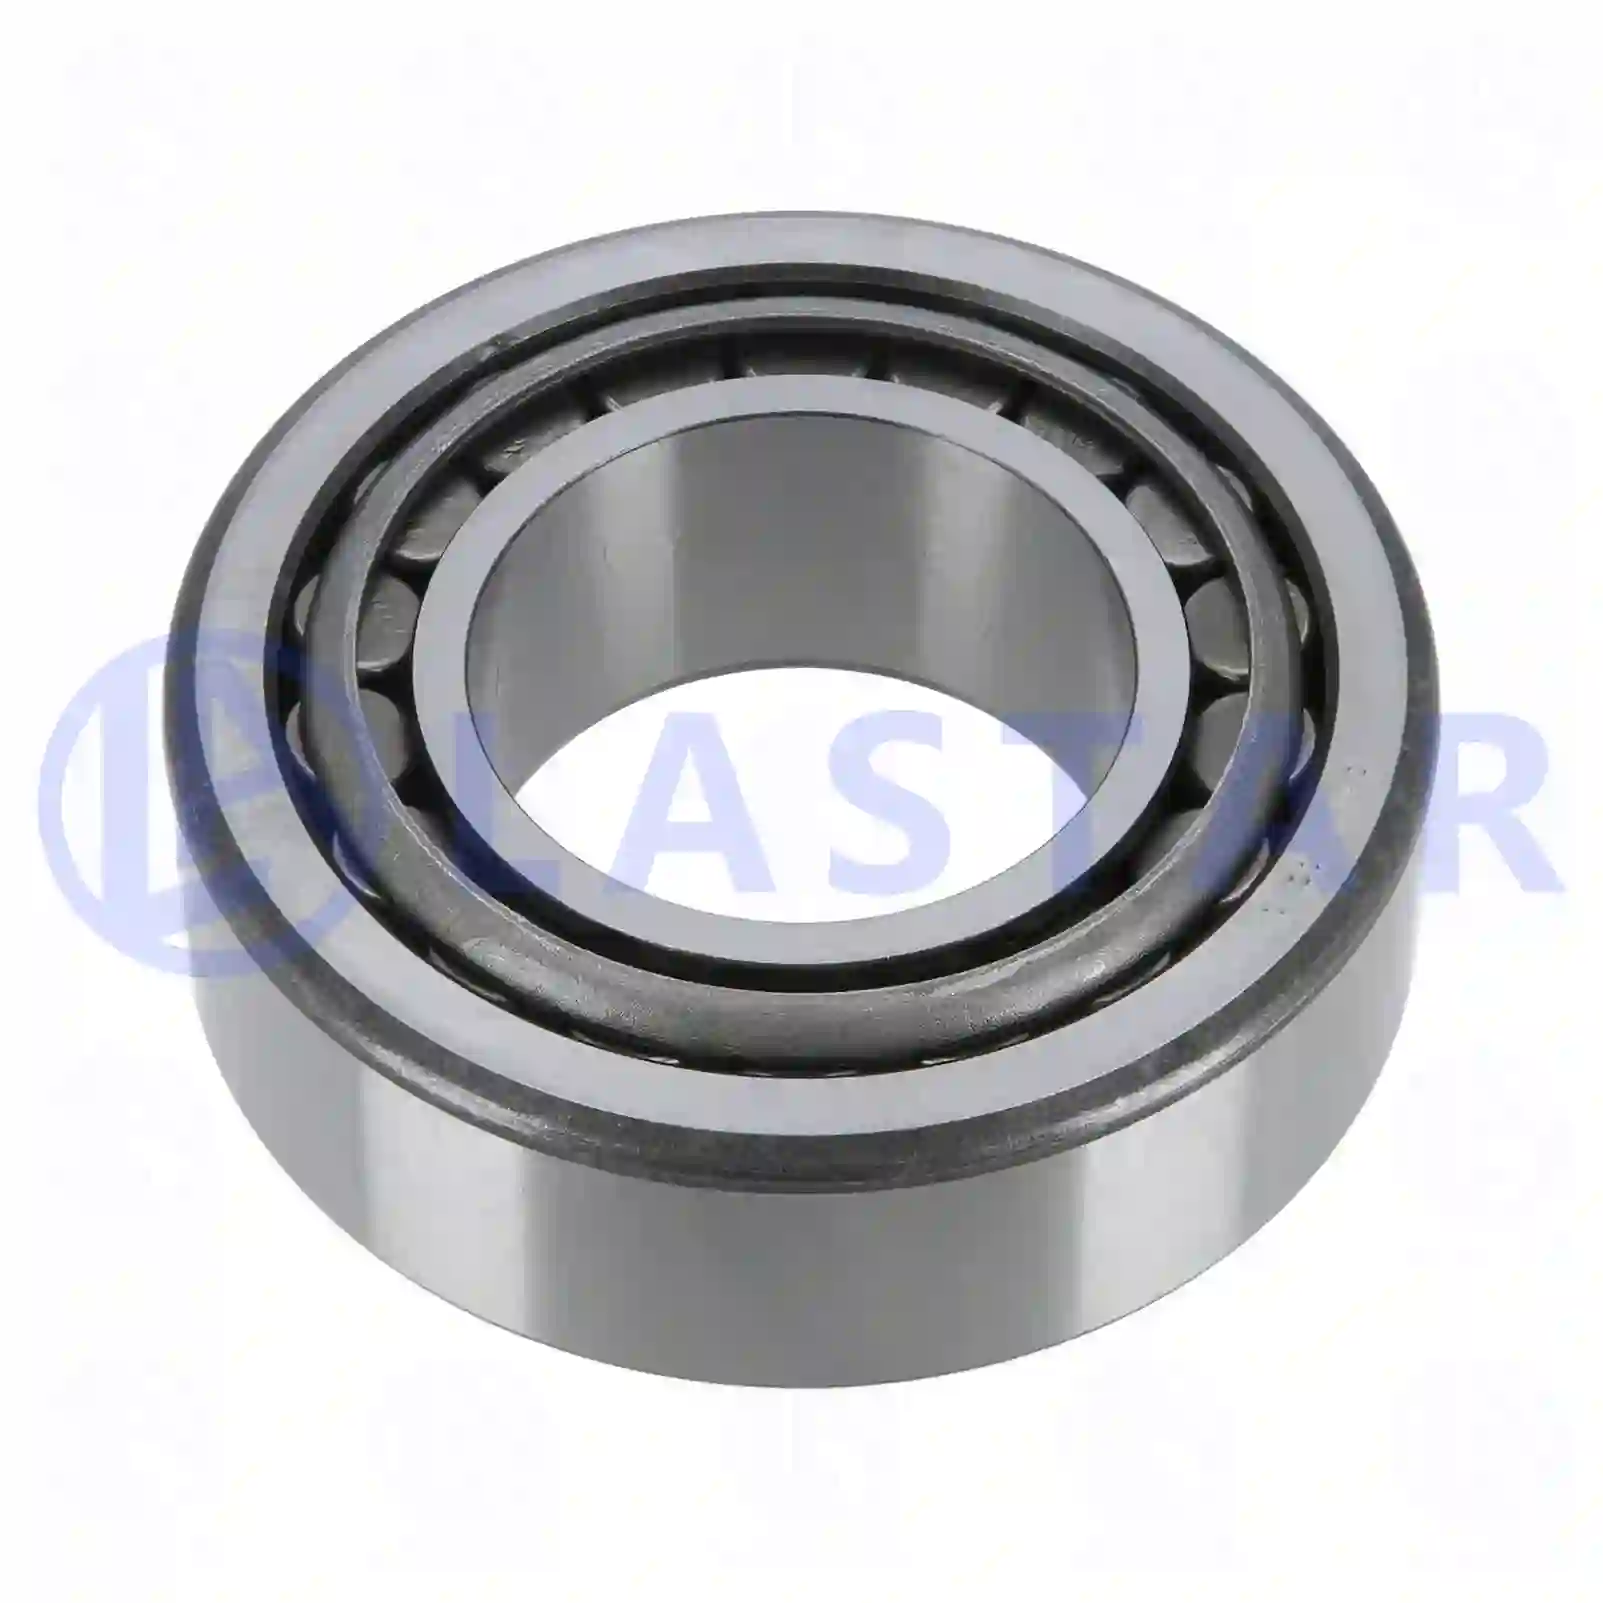 Hub Tapered roller bearing, la no: 77726077 ,  oem no:7421660722, 7422283632, 392039, 1654320, 184650, 20901349, 21660722, 22283632, ZG02975-0008 Lastar Spare Part | Truck Spare Parts, Auotomotive Spare Parts